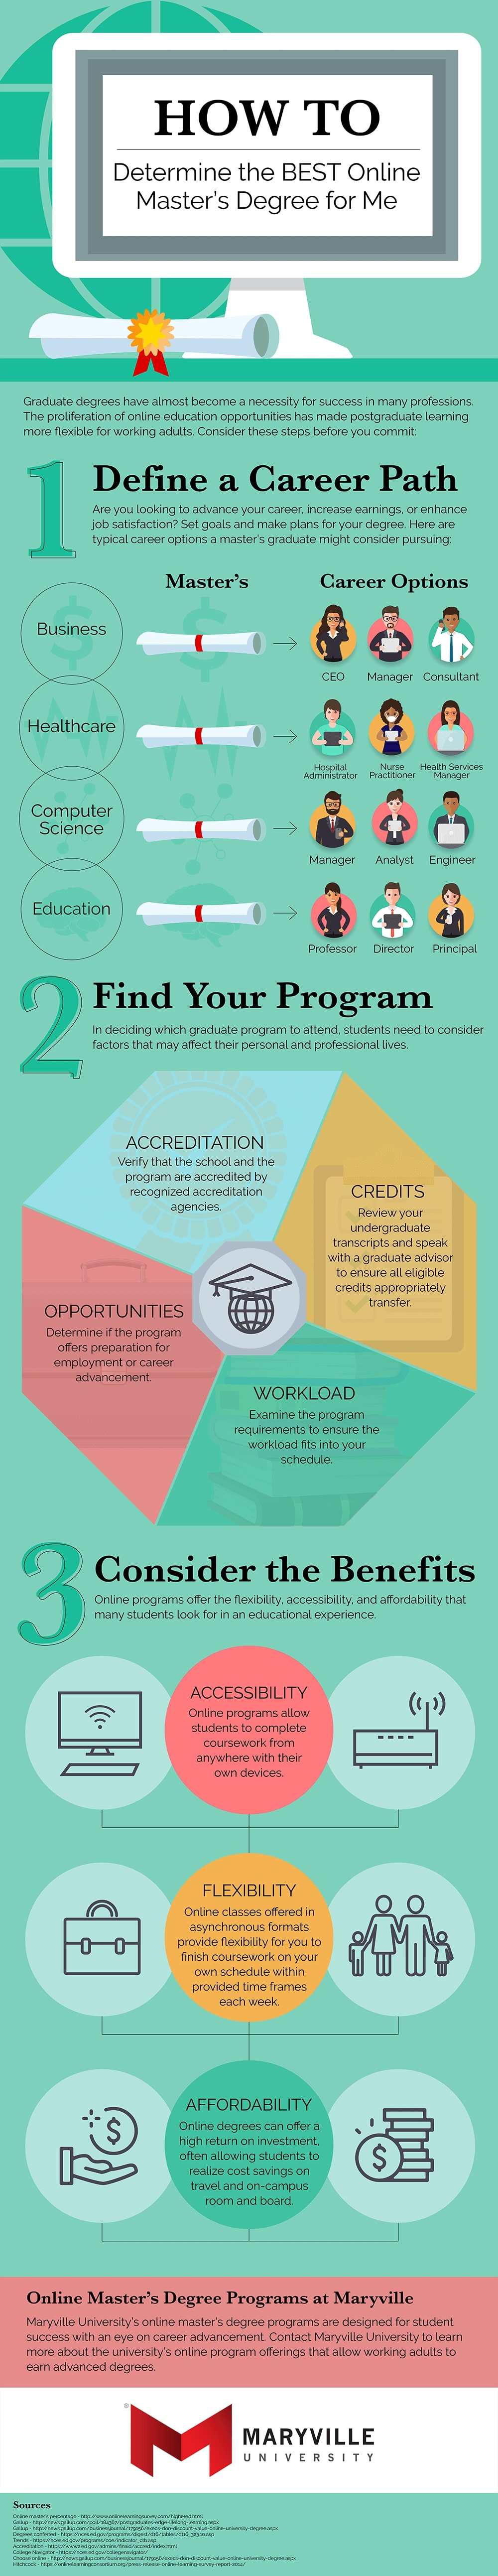 How to Determine the Best Online Master's Degree in 3 Steps Infographic